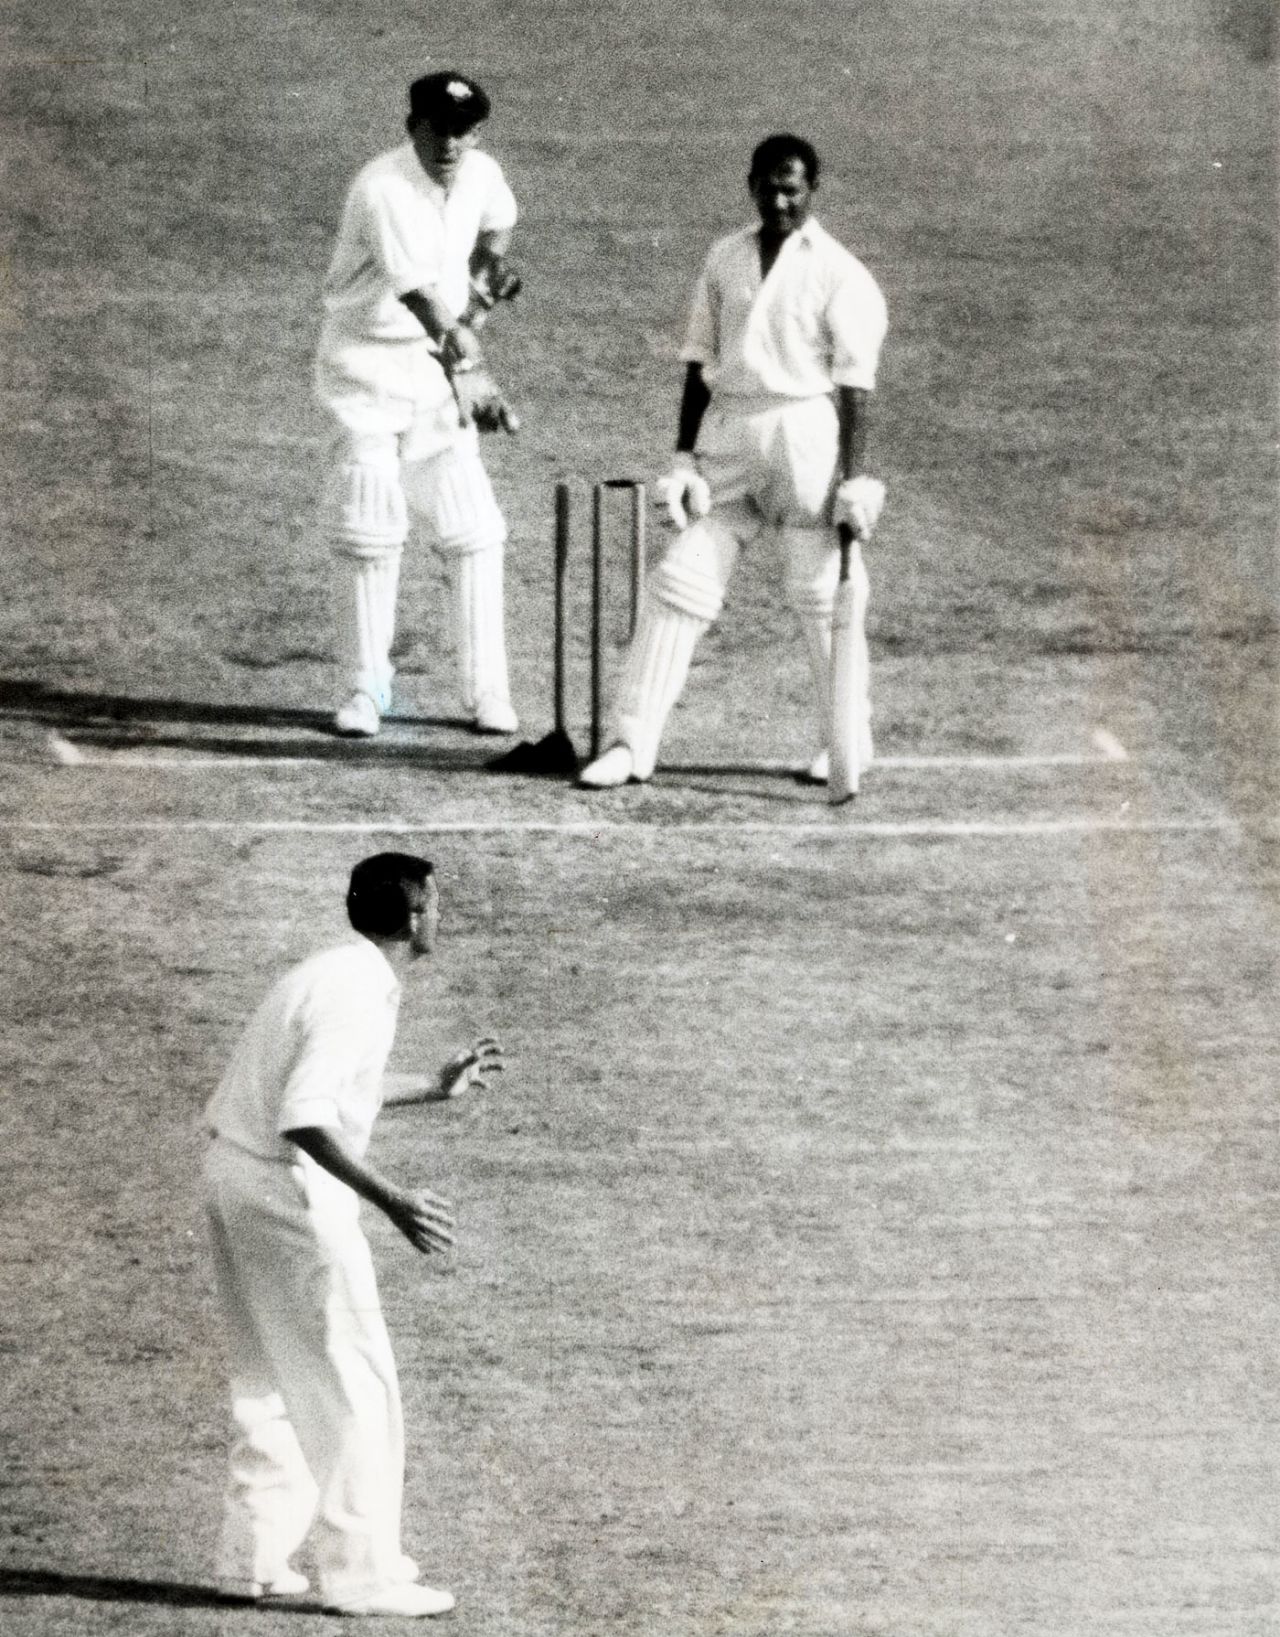 Richie Benaud and wicketkeeper Wally Grout wait for the umpire's decision after batsman Joe Solomon's cap falls and dislodges a bail, Australia v West Indies, 2nd Test, Melbourne, 3rd day, January 2, 1961